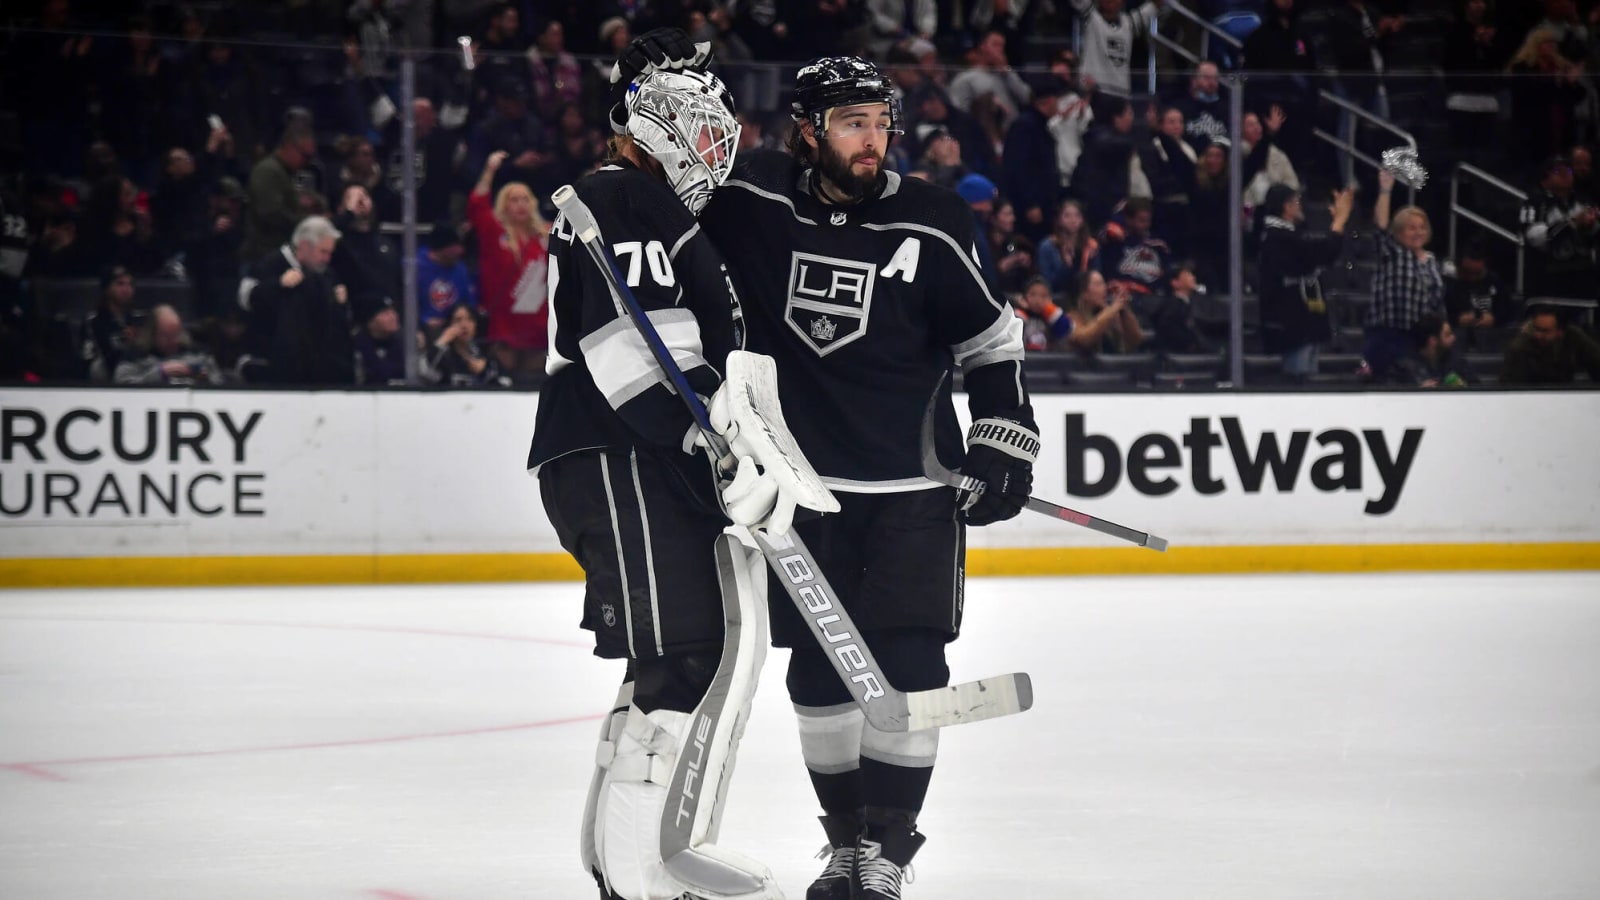 Oilers vs. Kings Would Be An Epic Playoff Matchup